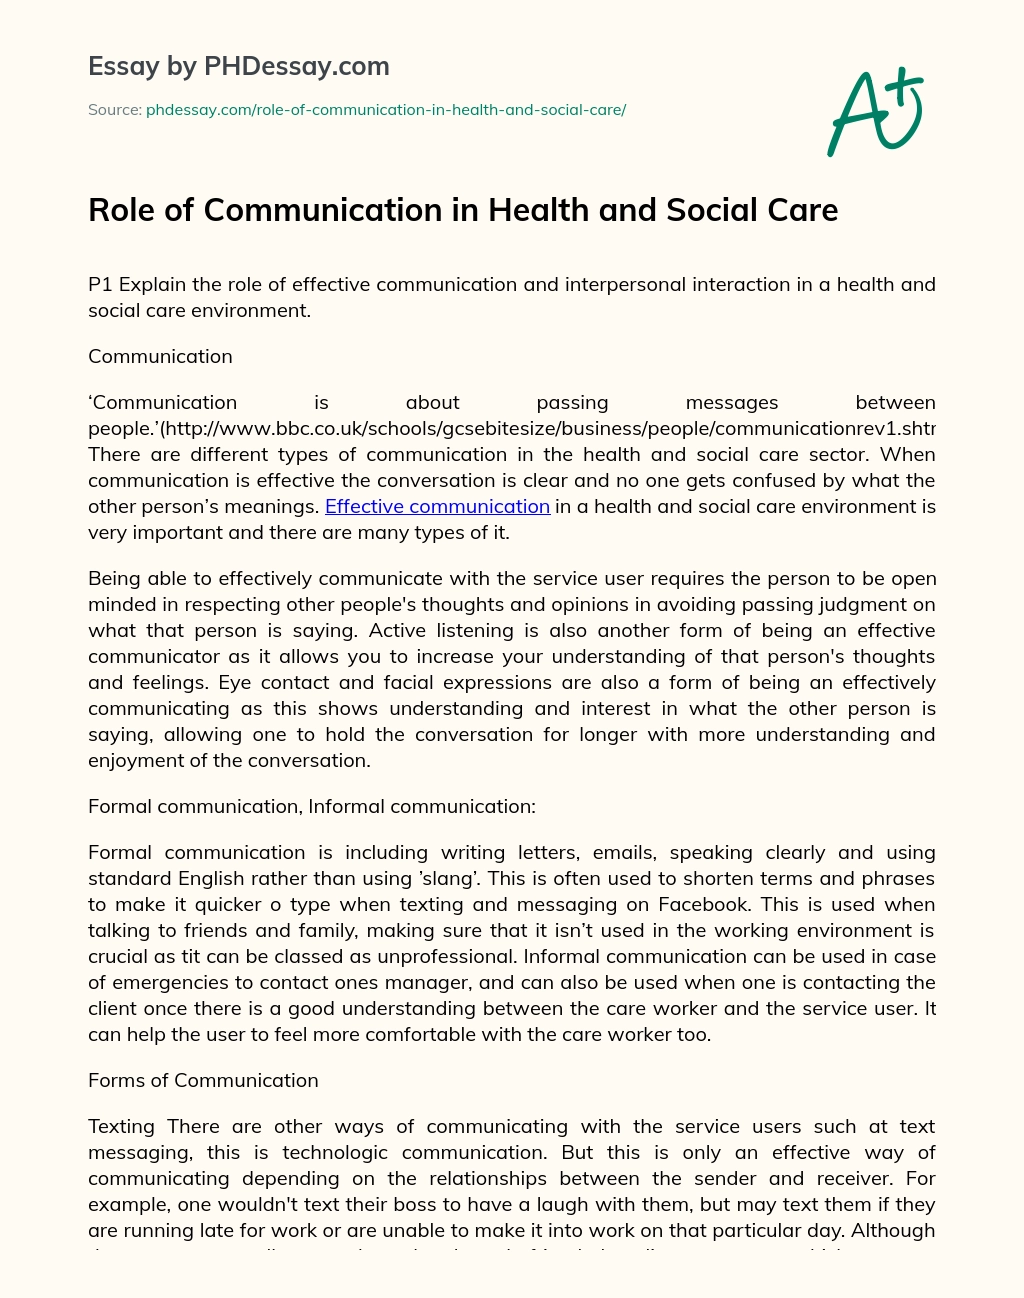 Role of Communication in Health and Social Care essay